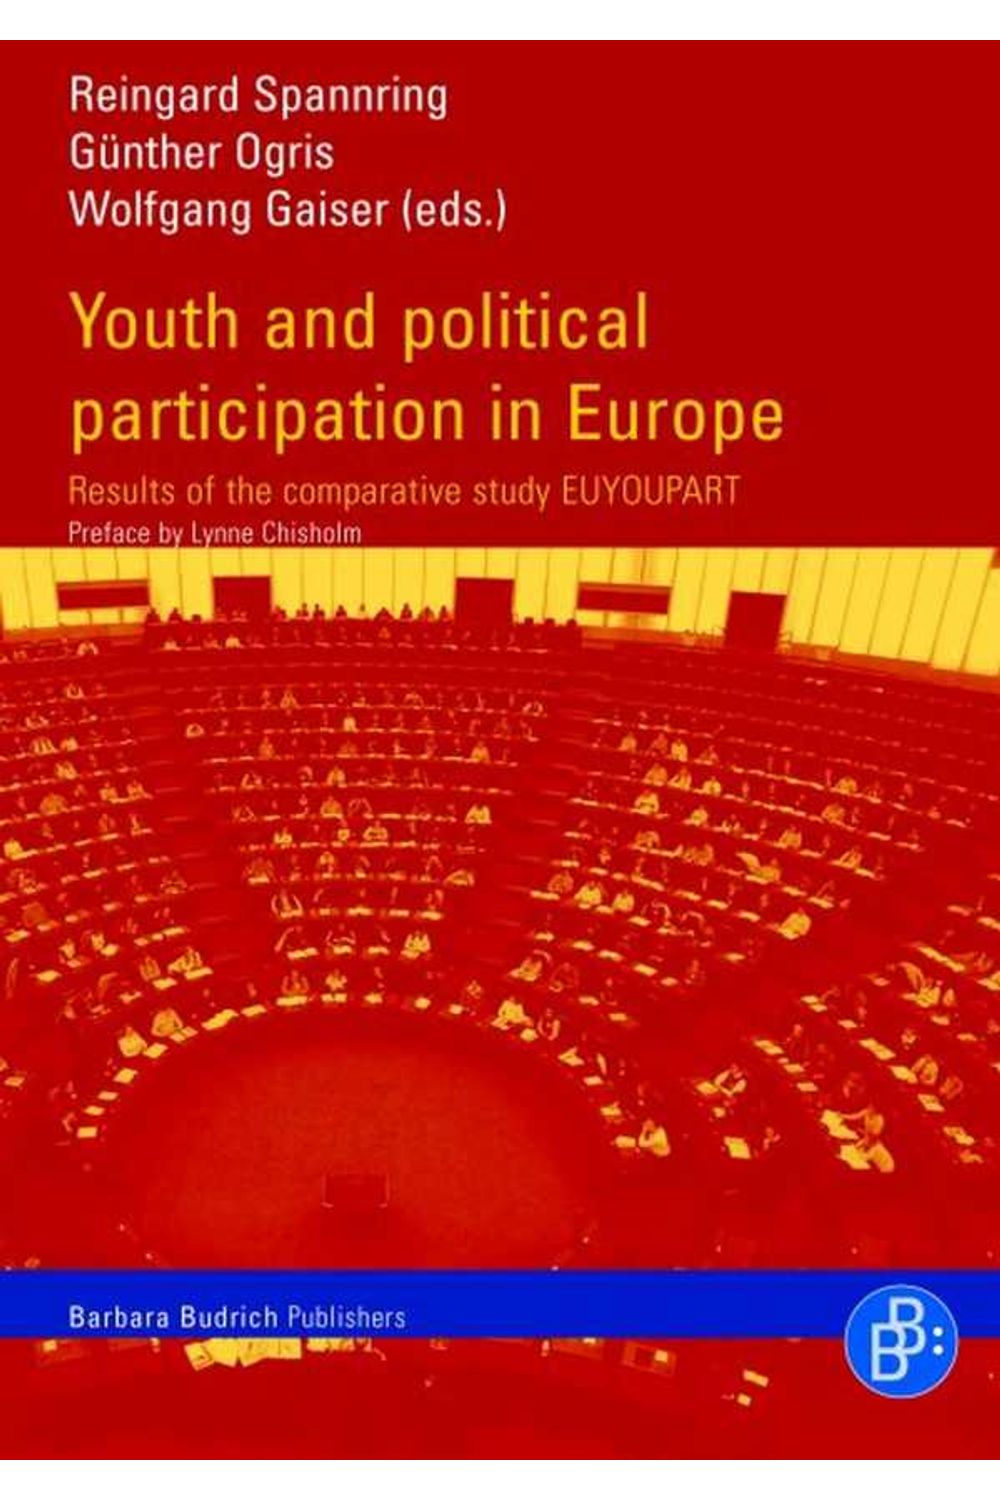 bw-youth-and-political-participation-in-europe-verlag-barbara-budrich-9783866498679